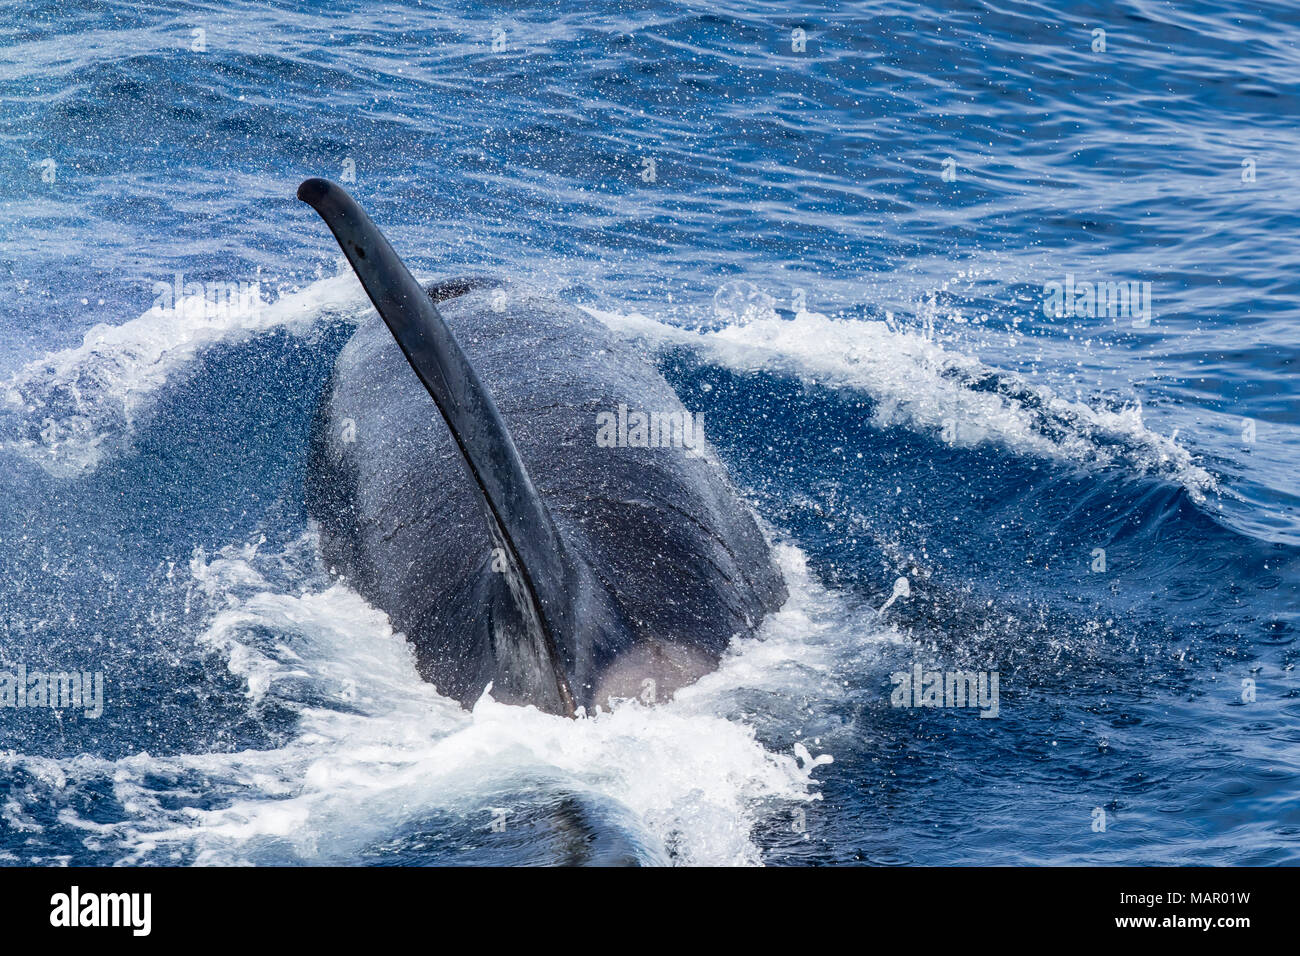 An adult bull Type D (sub-Antarctic) killer whale (Orcinus orca), surfacing in the Drake Passage, Antarctica, Polar Regions Stock Photo